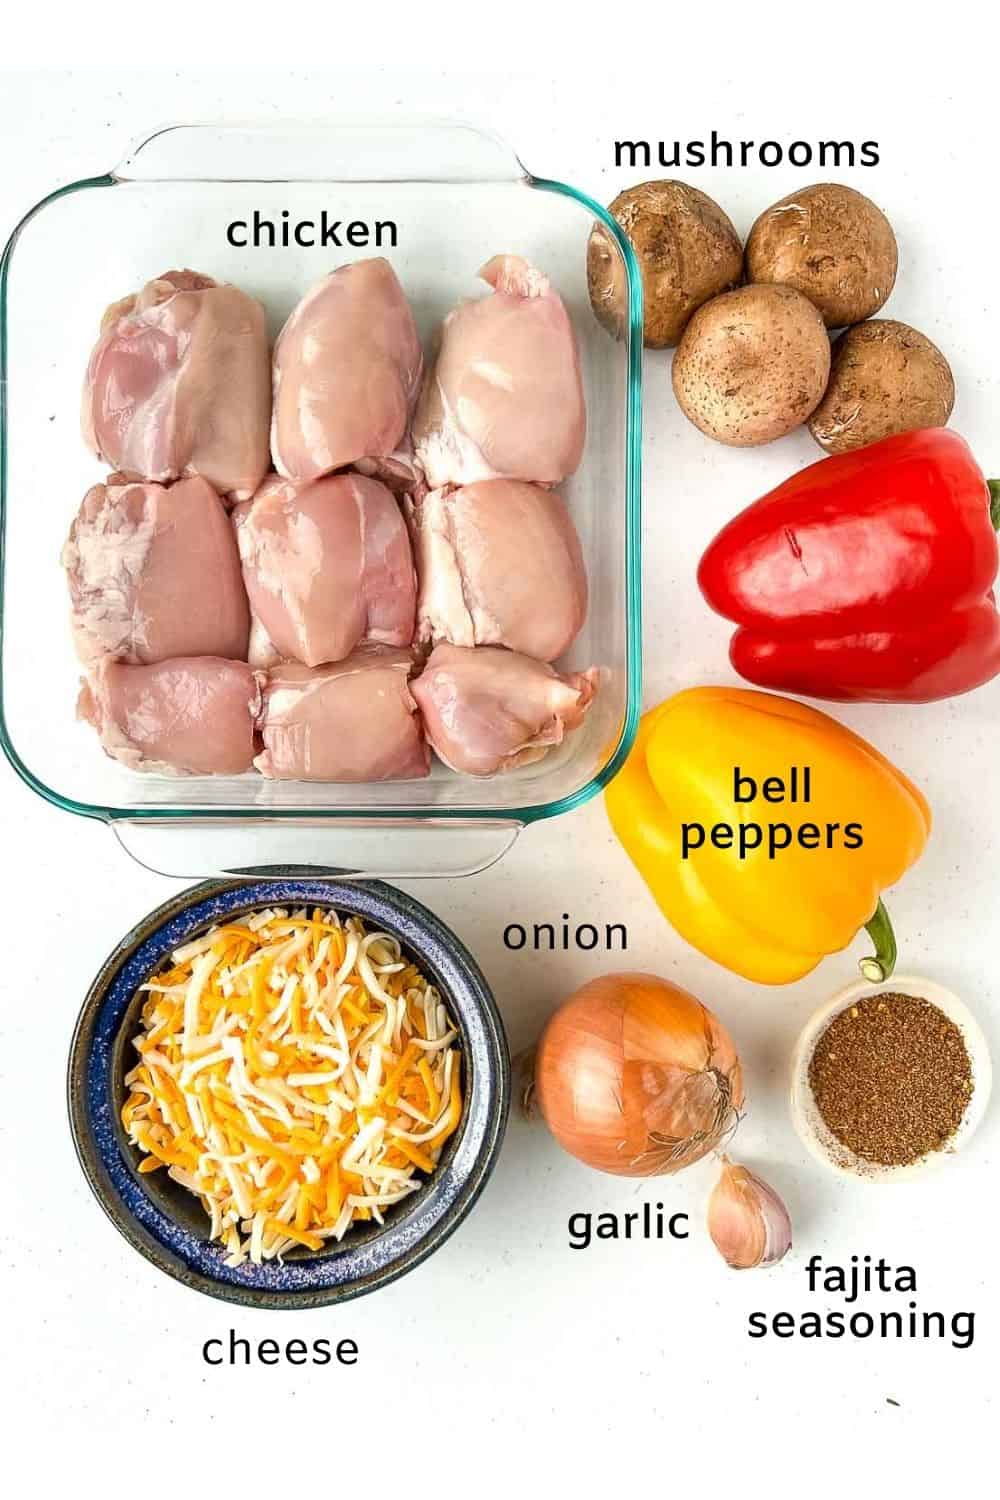 Ingredients with labels for baked chicken fajita casserole.